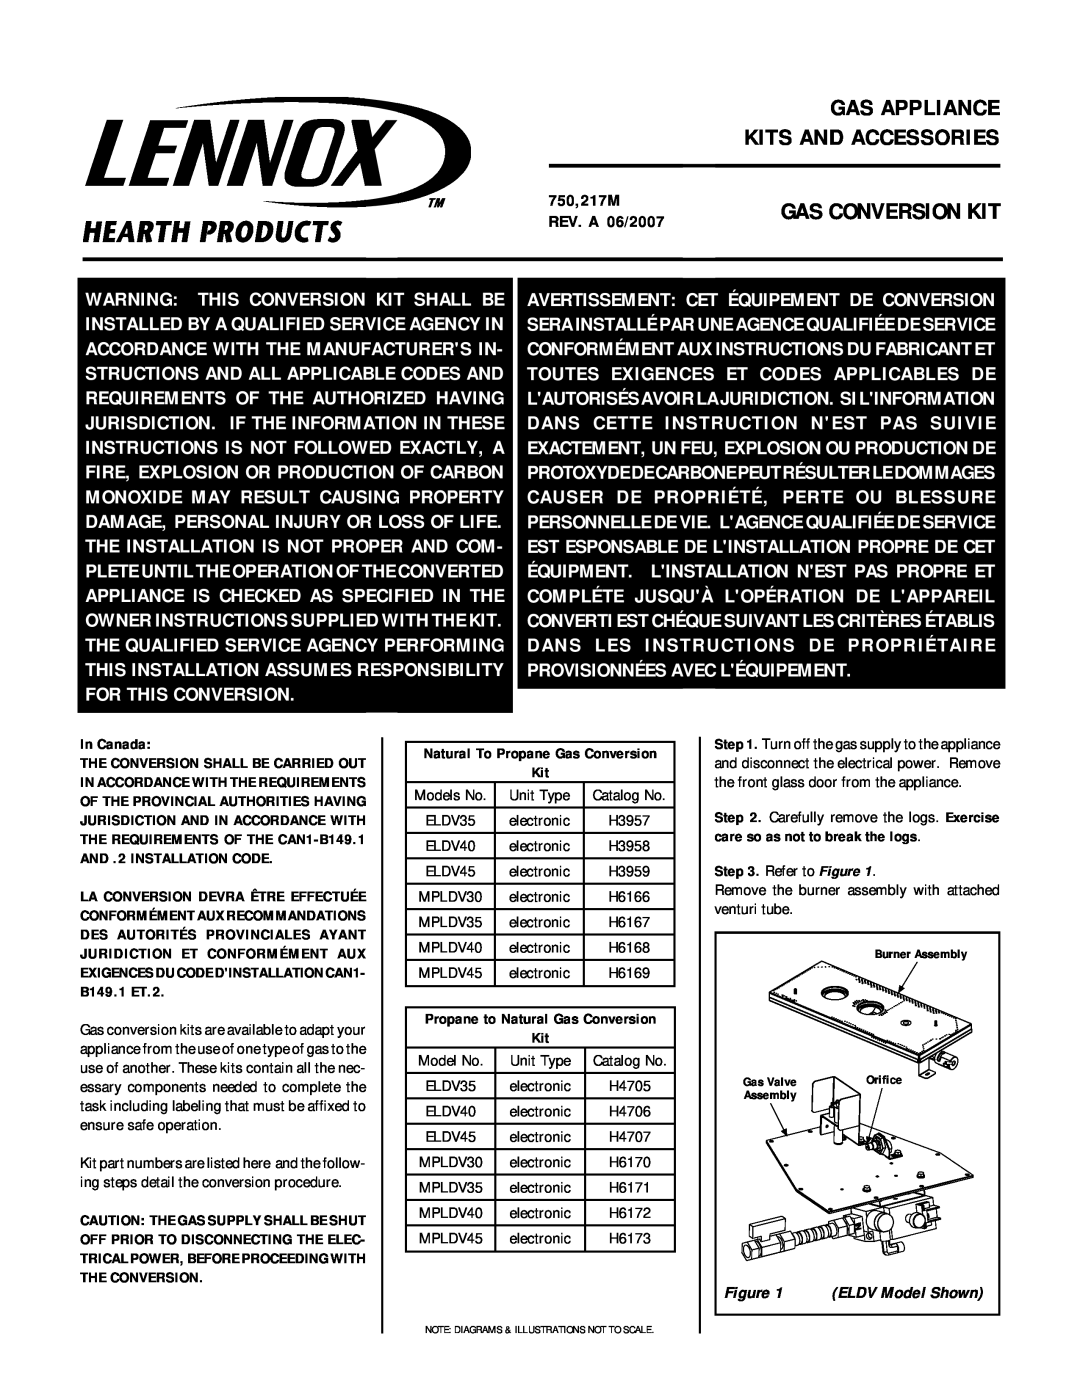 Lennox Hearth MPLDV40 manual Gas Conversion Kit, In Canada, AND .2 INSTALLATION CODE, Gas Appliance Kits And Accessories 